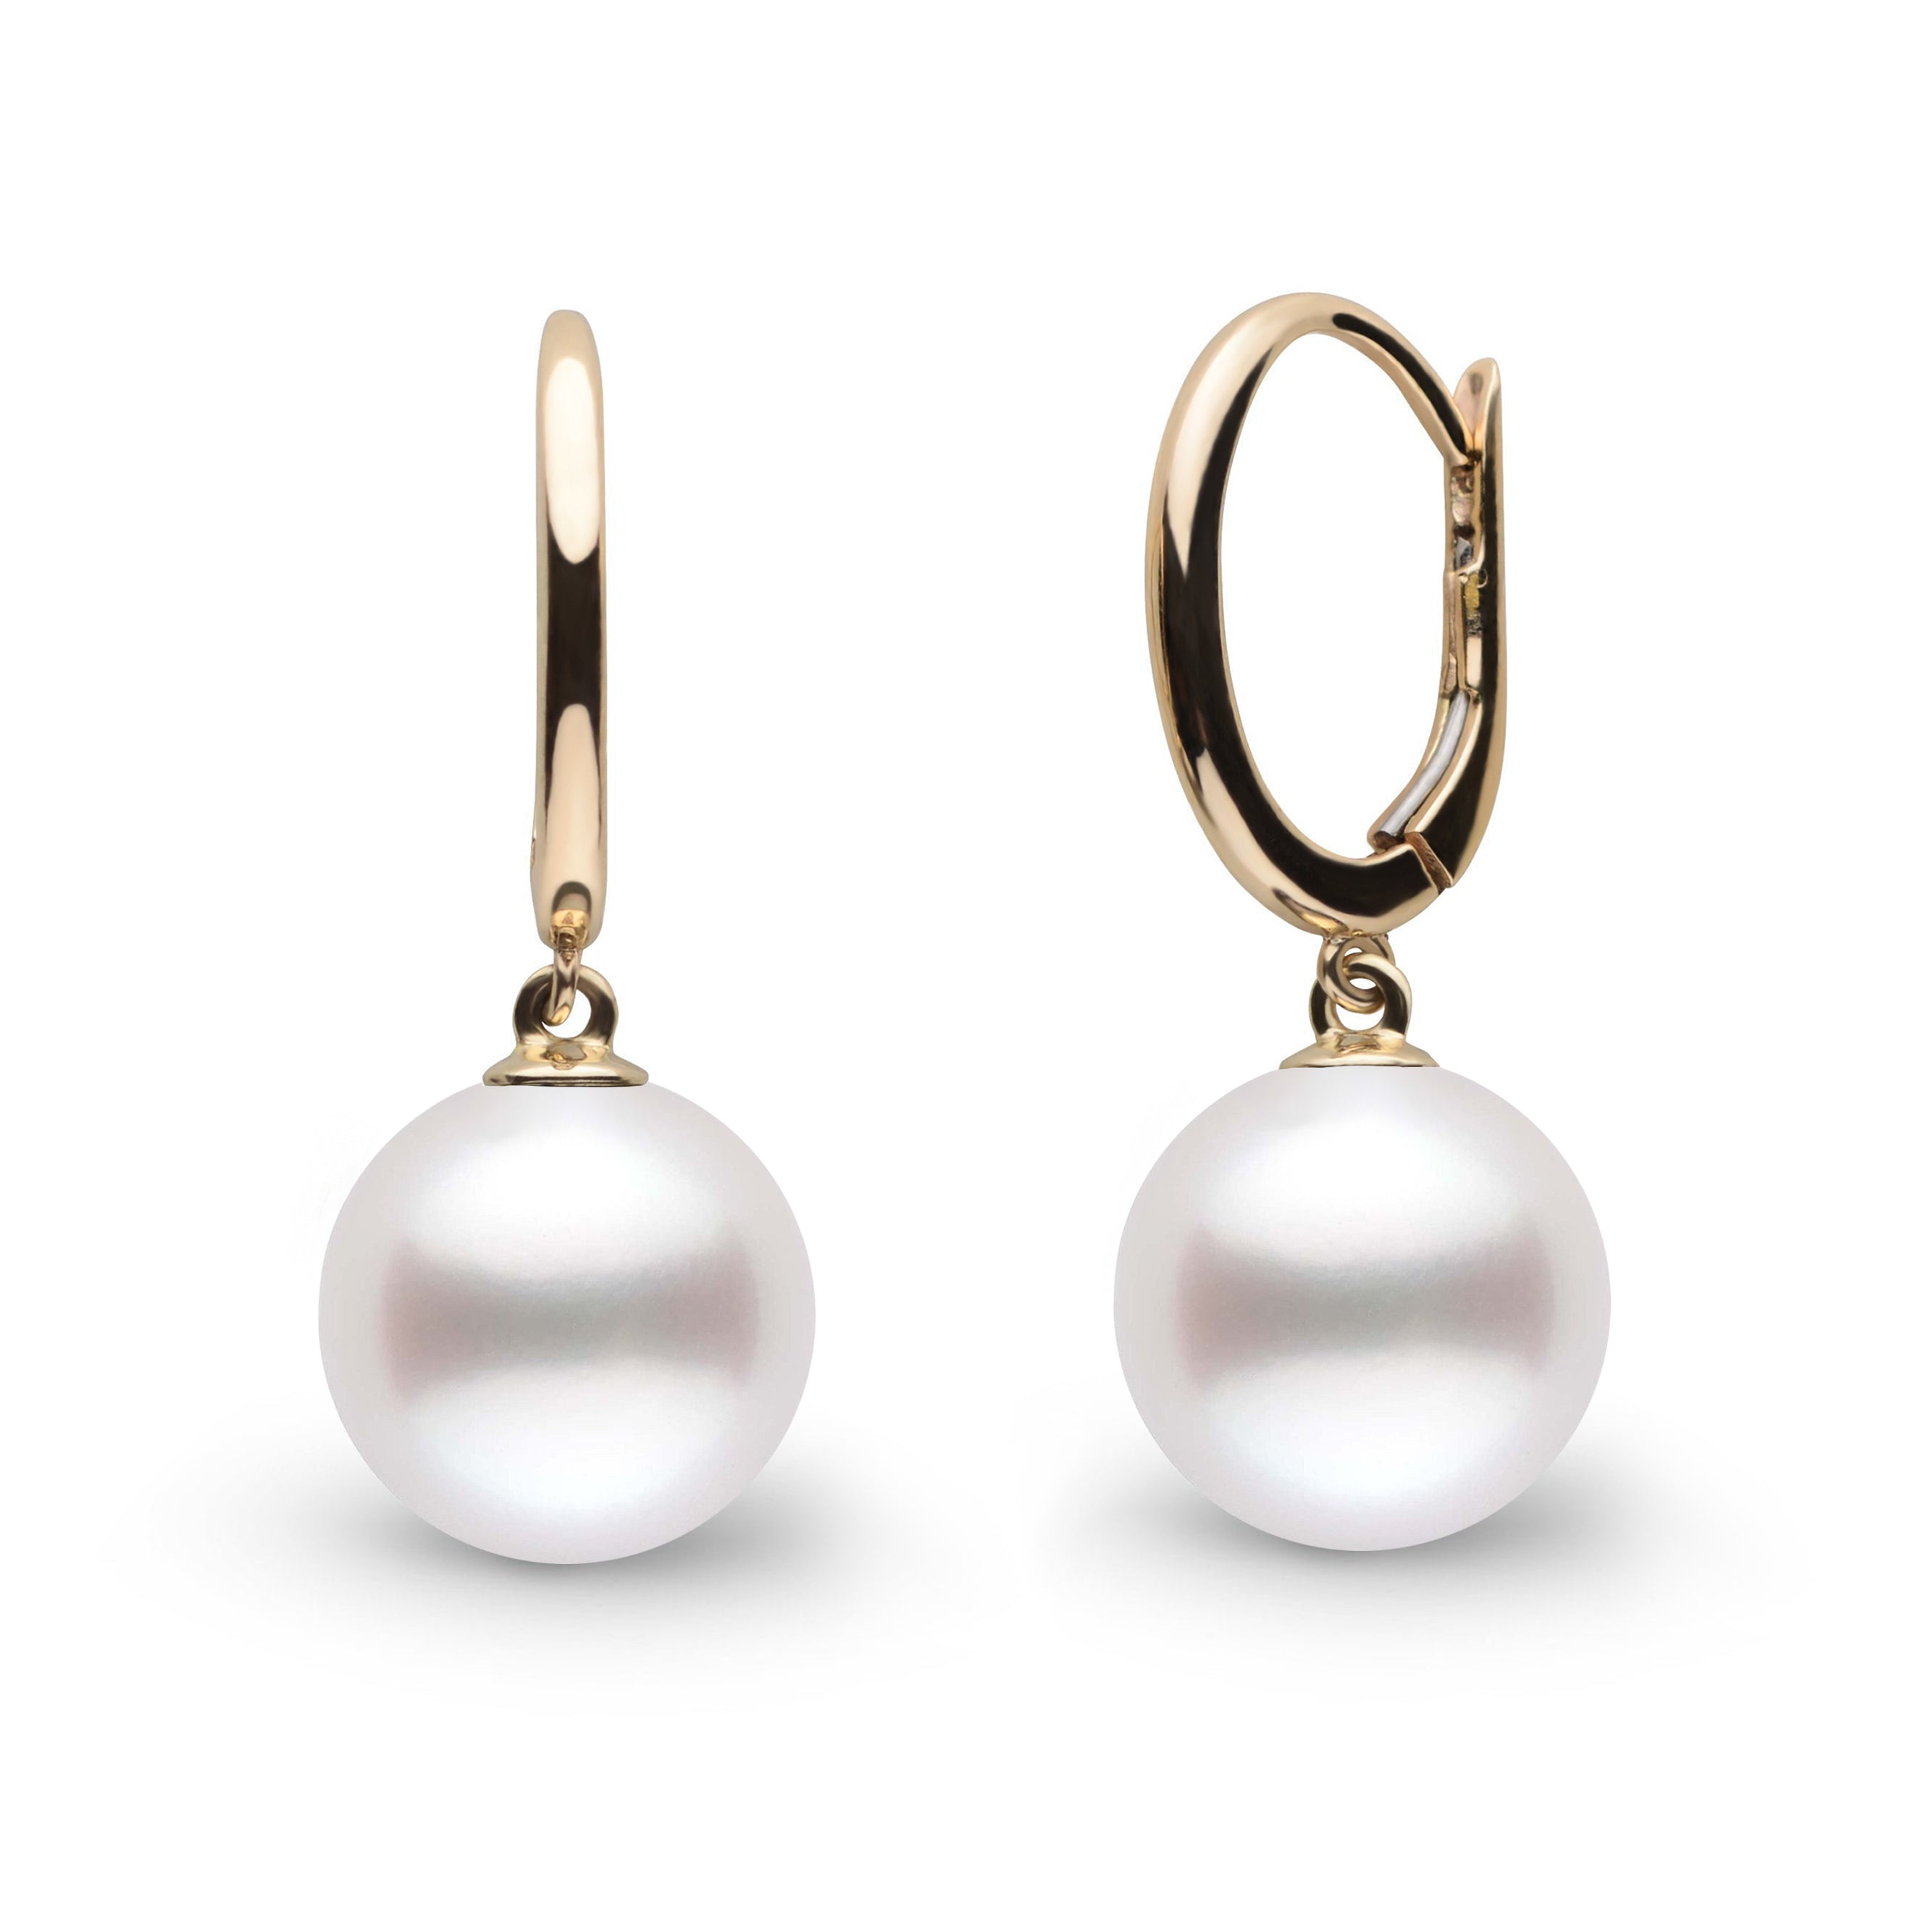 Solid Eternal Collection 10.0-11.0 mm White South Sea Pearl Earrings